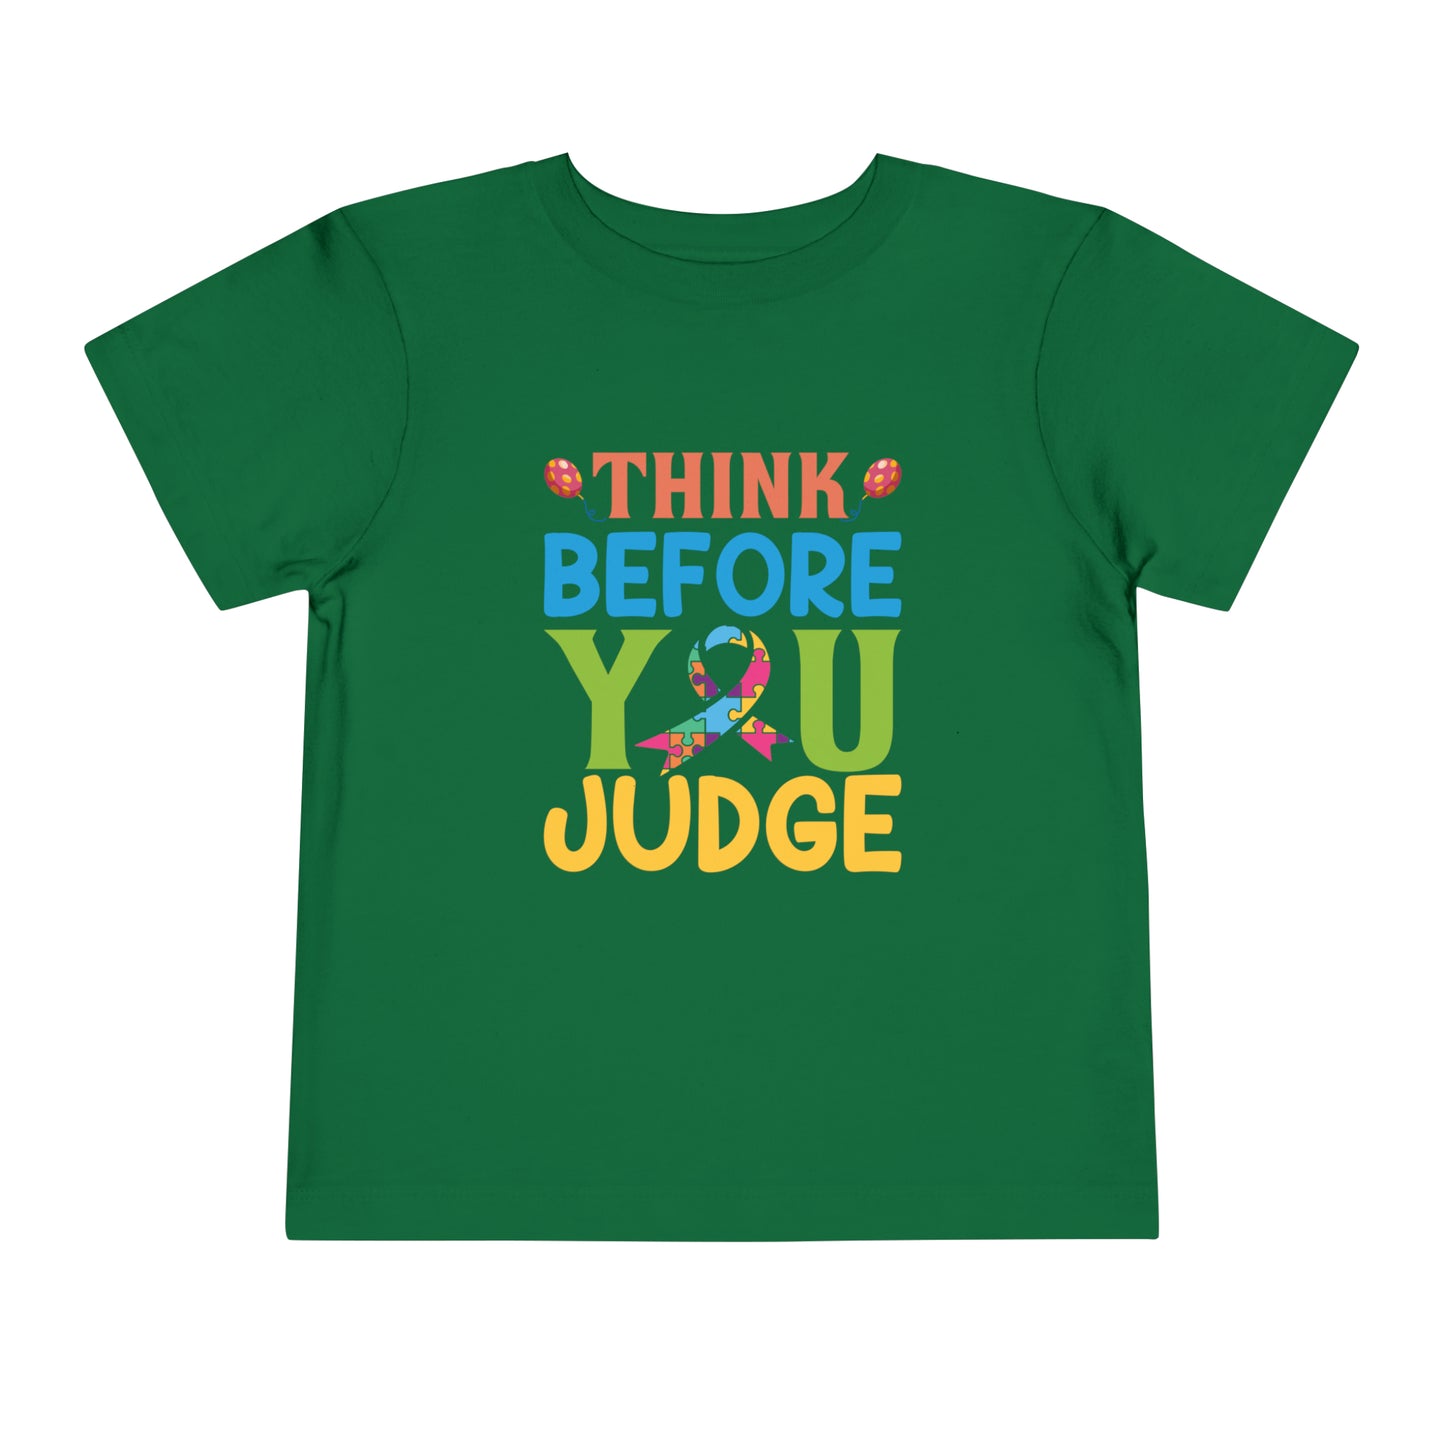 Think Before You Judge Autism Awareness Advocate Toddler Short Sleeve Tee